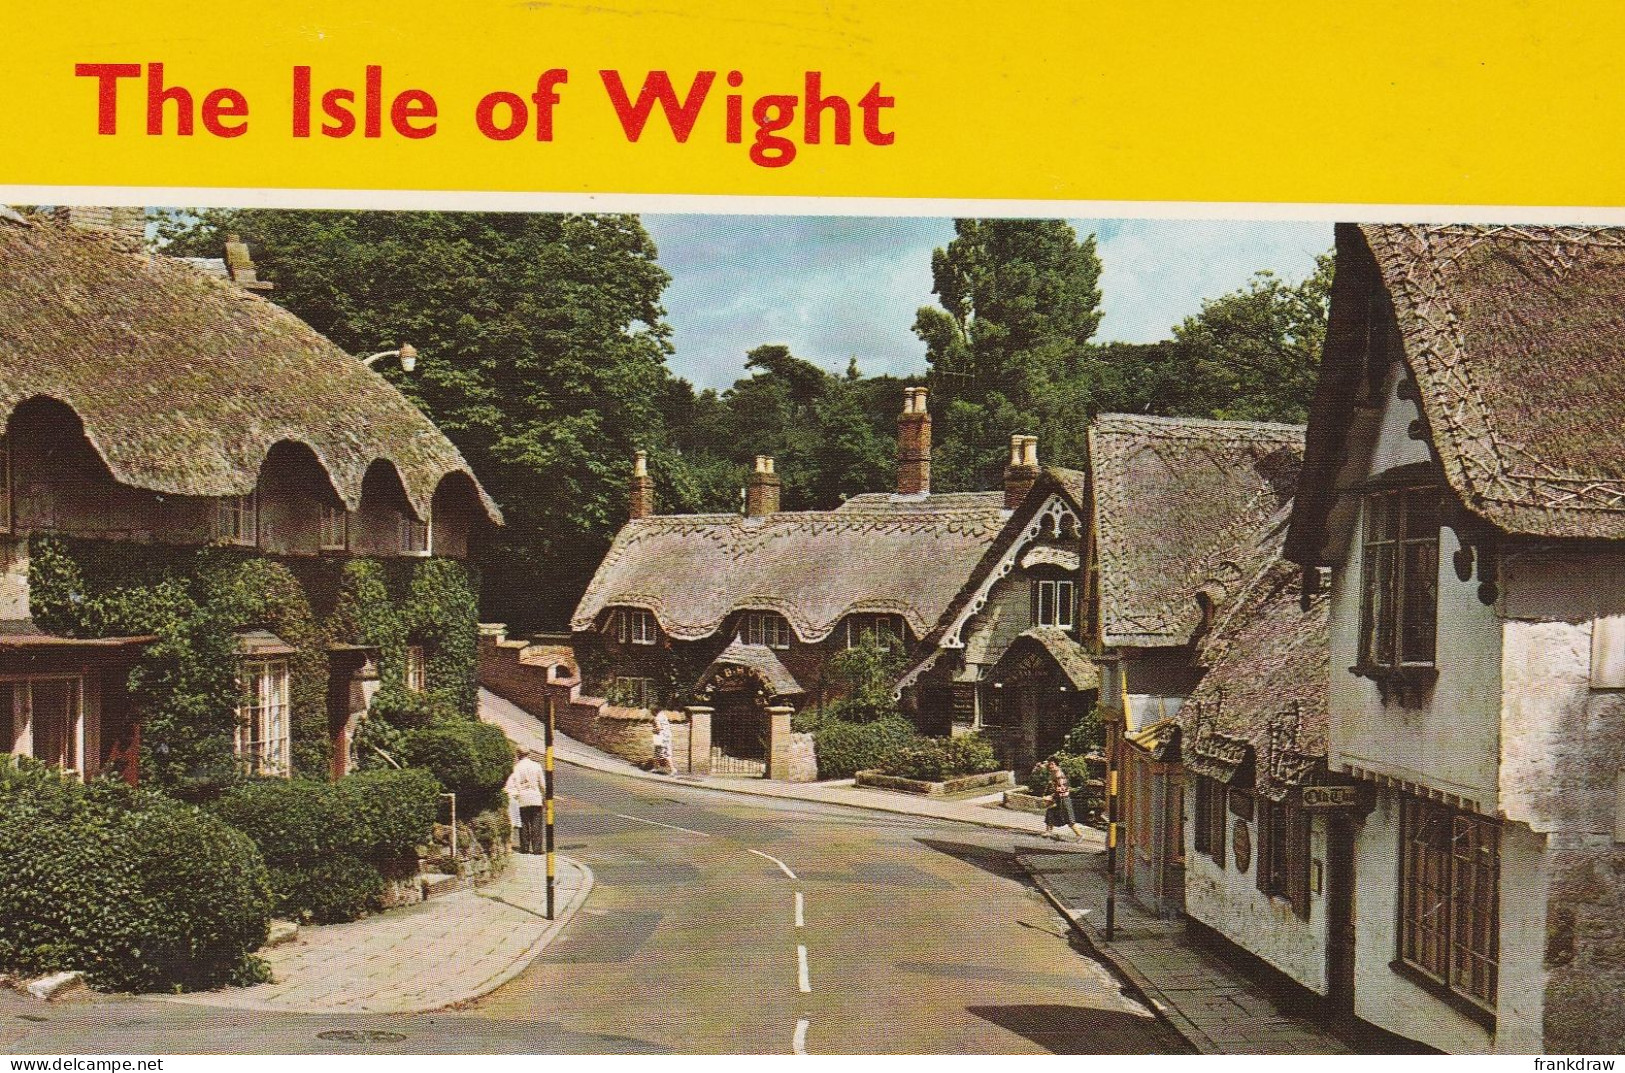 Postcard - The Old Village Of Shanklin - I.O.W - No Card No  - Very Good - Unclassified